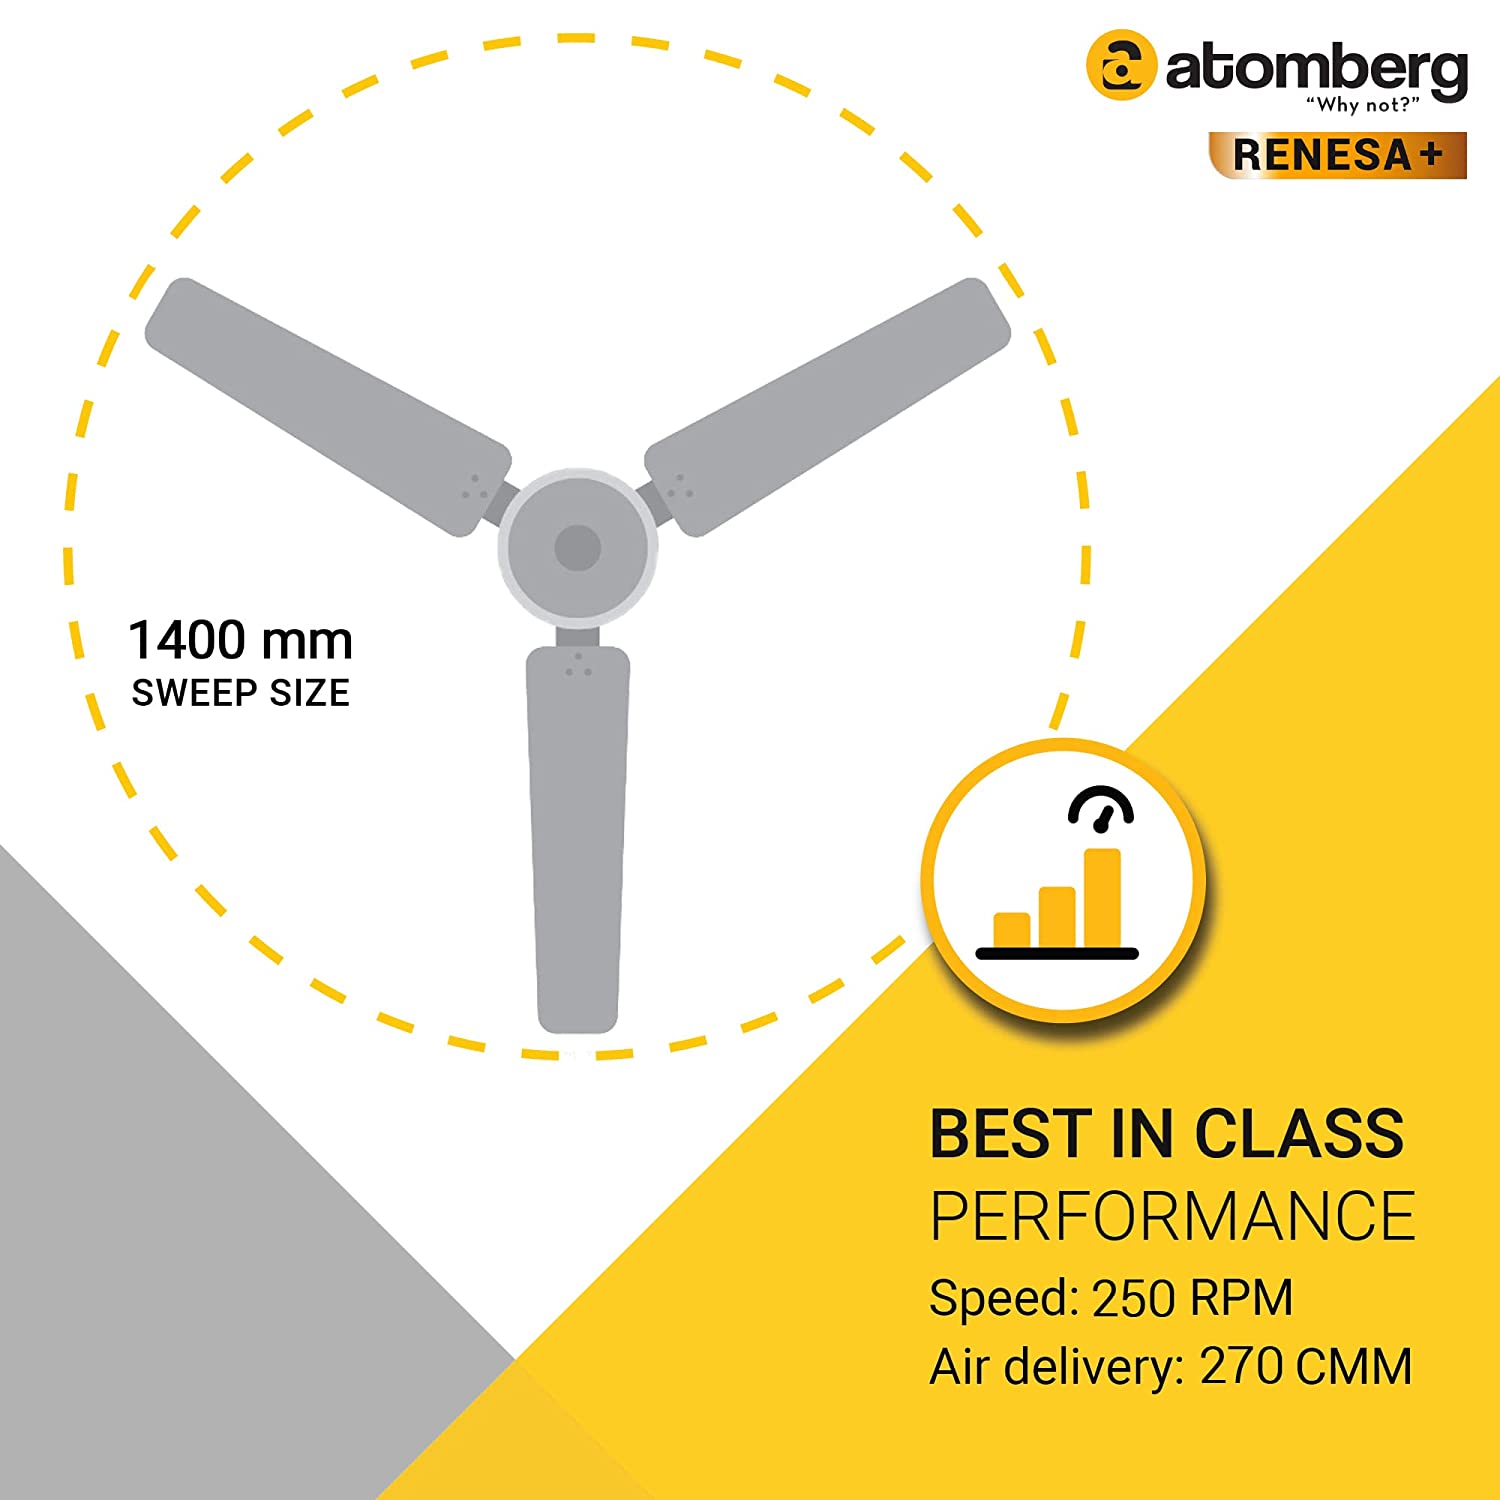 Atomberg Renesa+ 56" 35W BLDC motor Energy Saving Anti-Dust Speed Indicator Light  Ceiling Fan with Remote Control (Pearl White) AT-101 - Ceiling Fan - Best Ceiling Fan Price in Bangladesh  | Alphaeshop.store